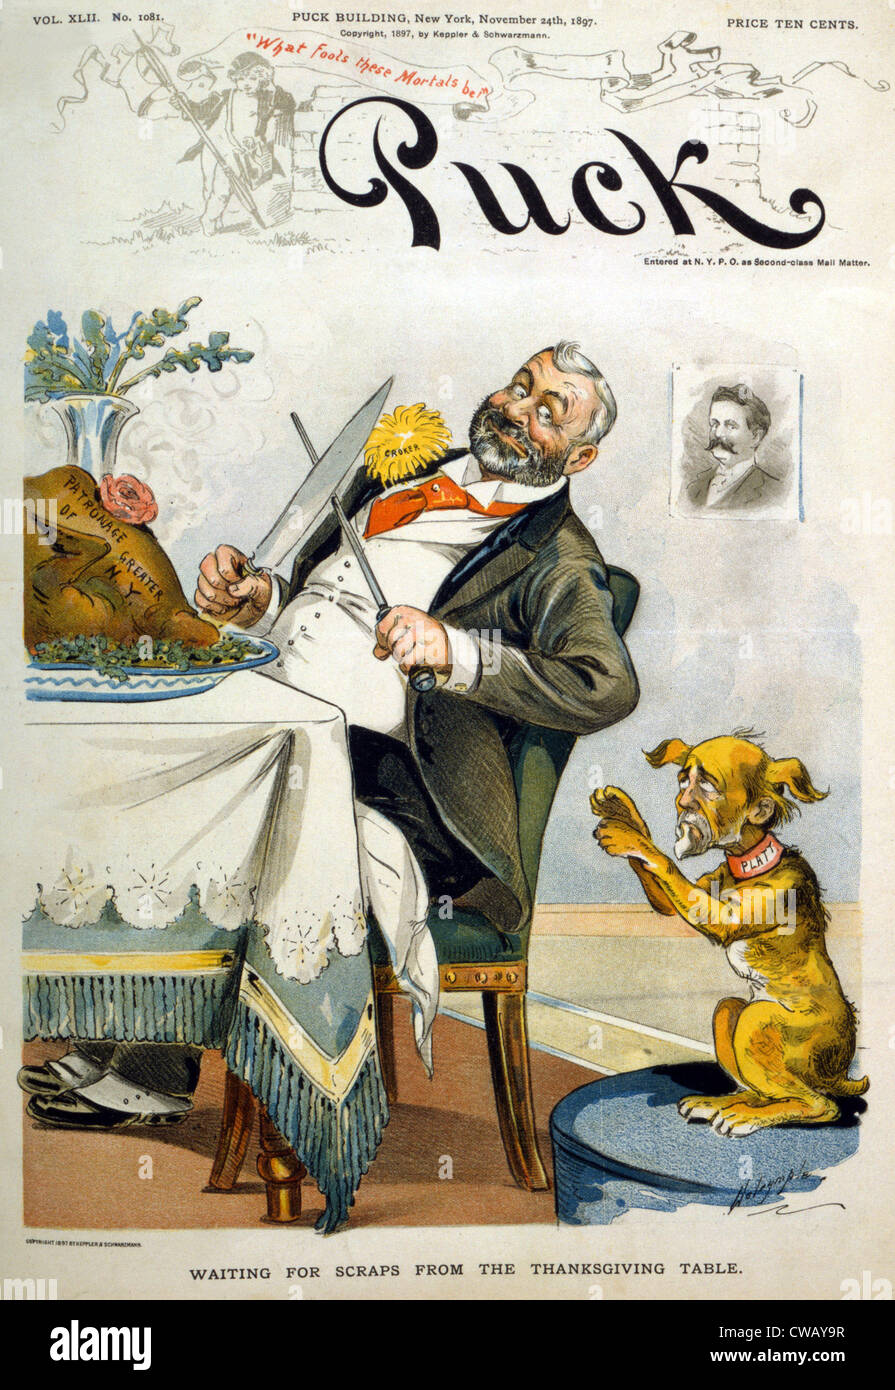 Thanksgiving, Puck Magazine cover entitled Waiting for scraps from the Thanksgiving table, Political cartoon showing Richard Stock Photo